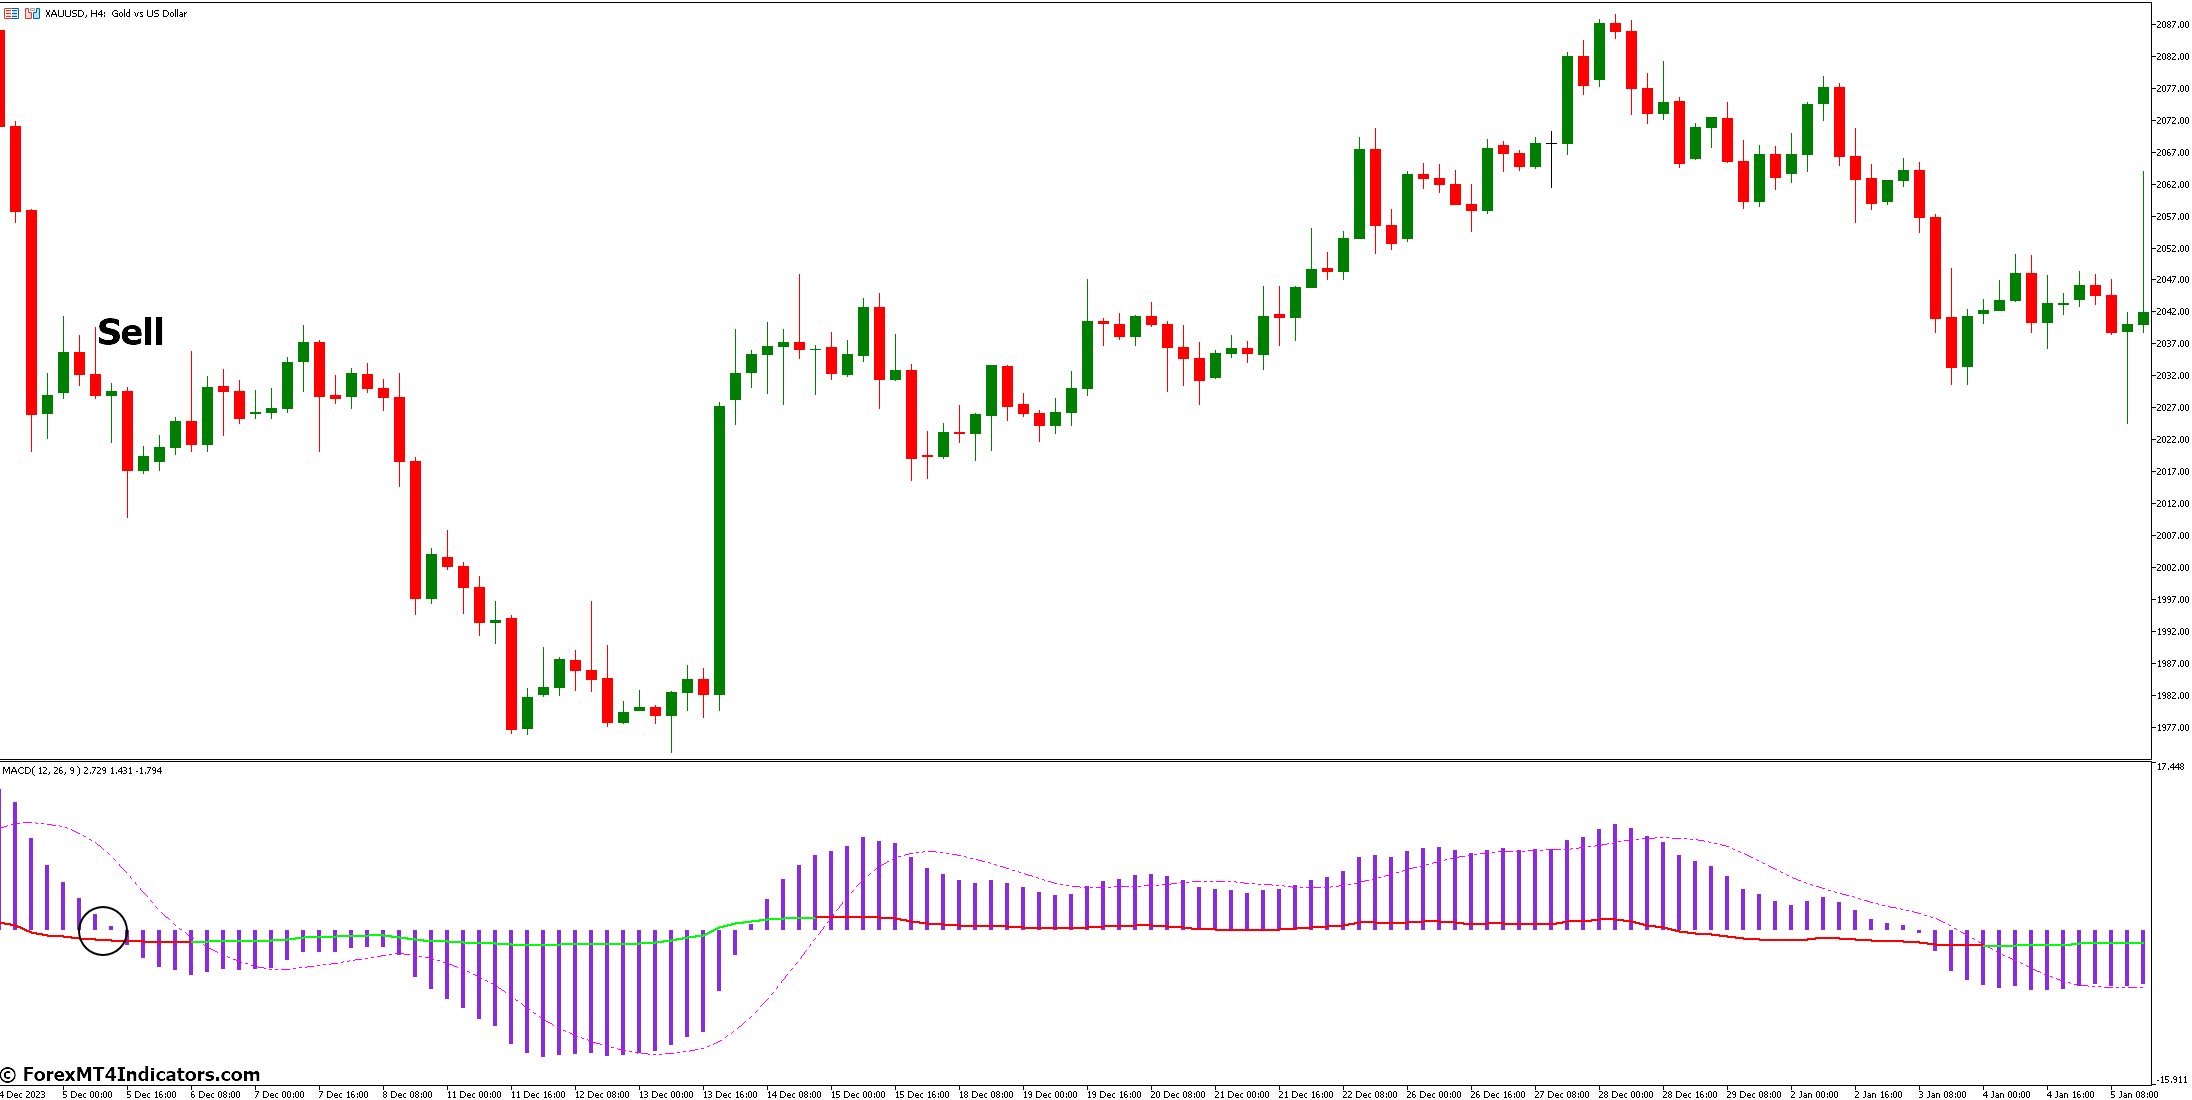 How to Trade with MACD RSI Indicator - Sell Entry